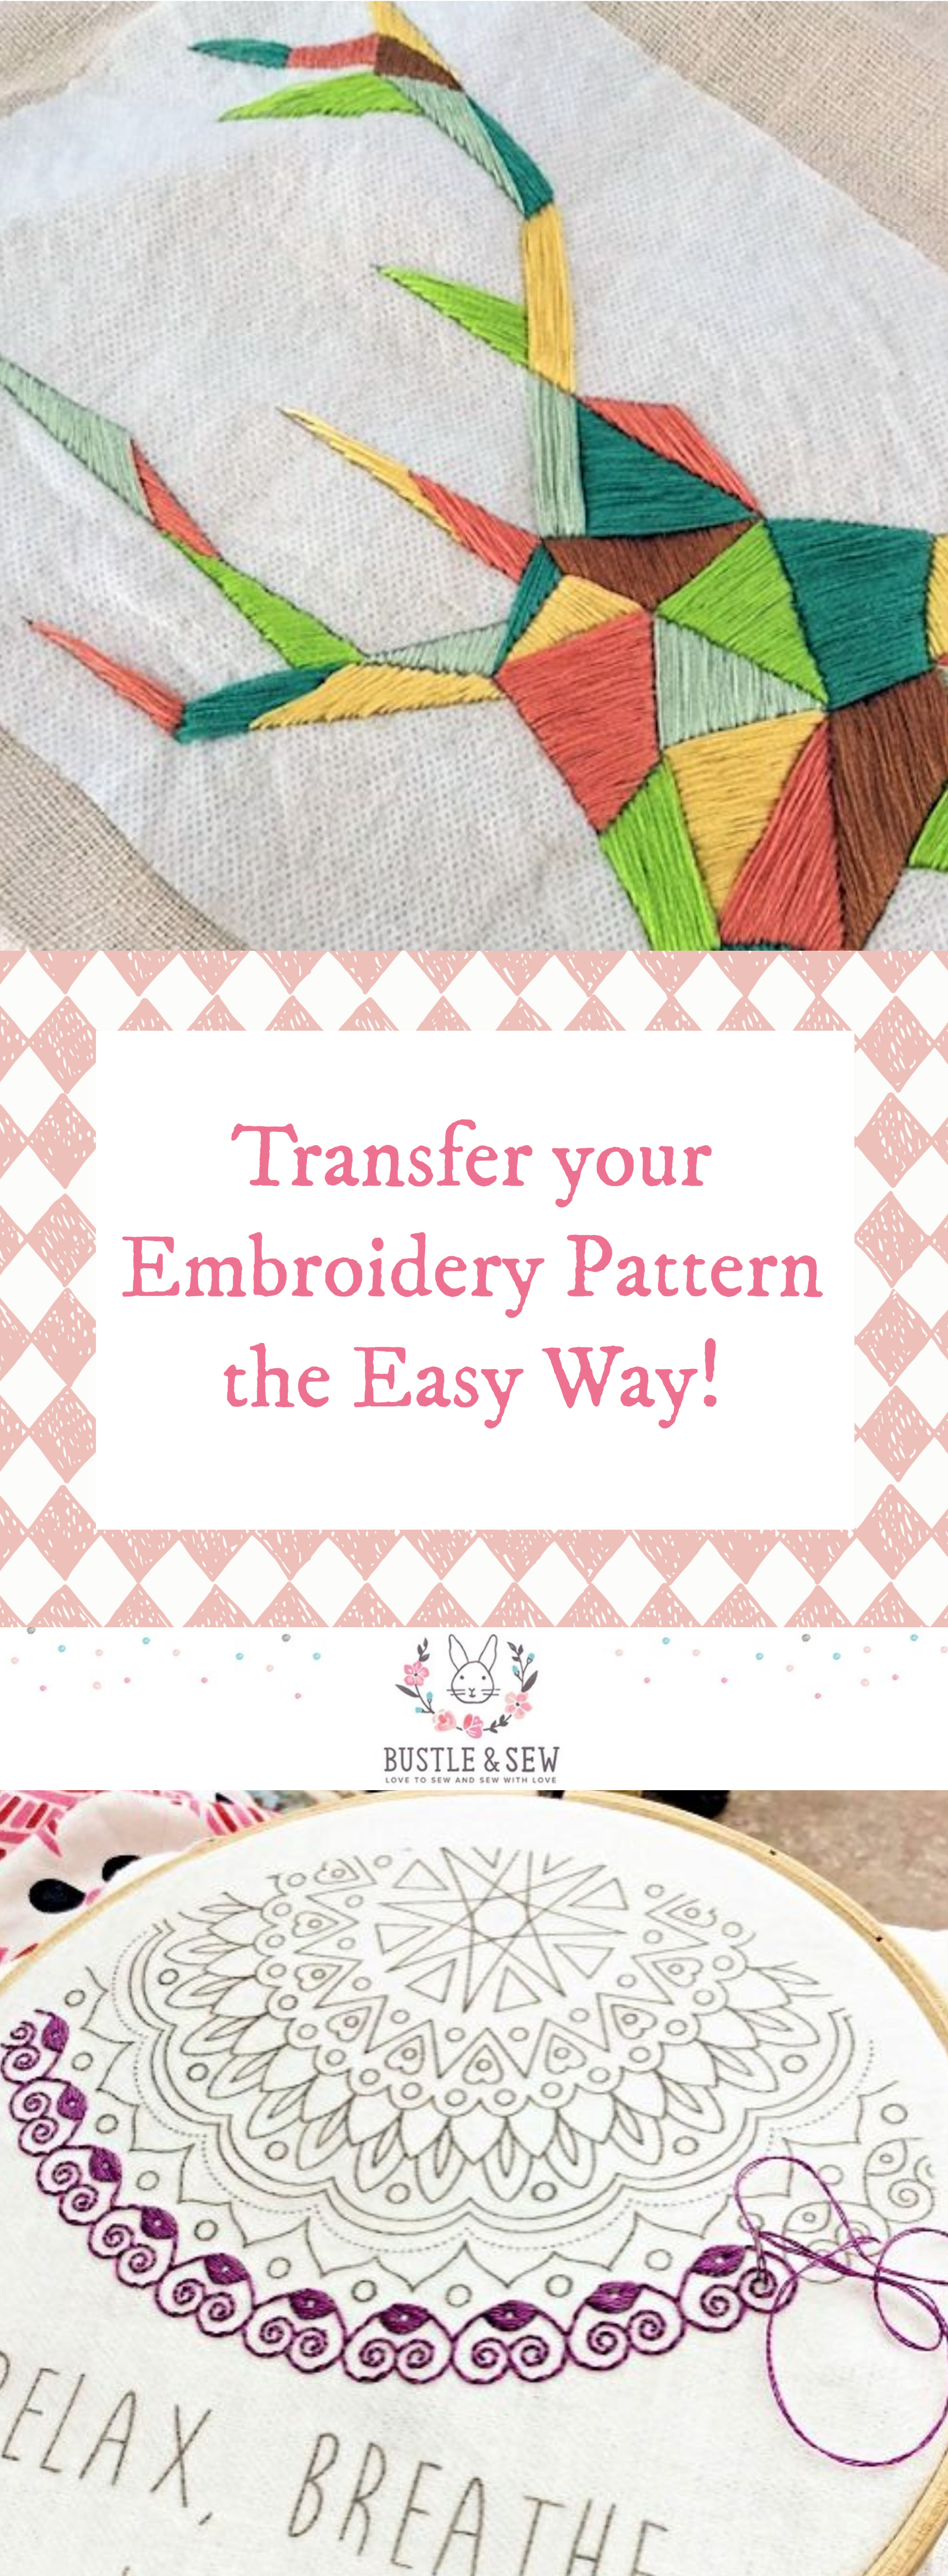 Transfer your Embroidery Pattern the Easy Way - tutorial from Bustle & Sew